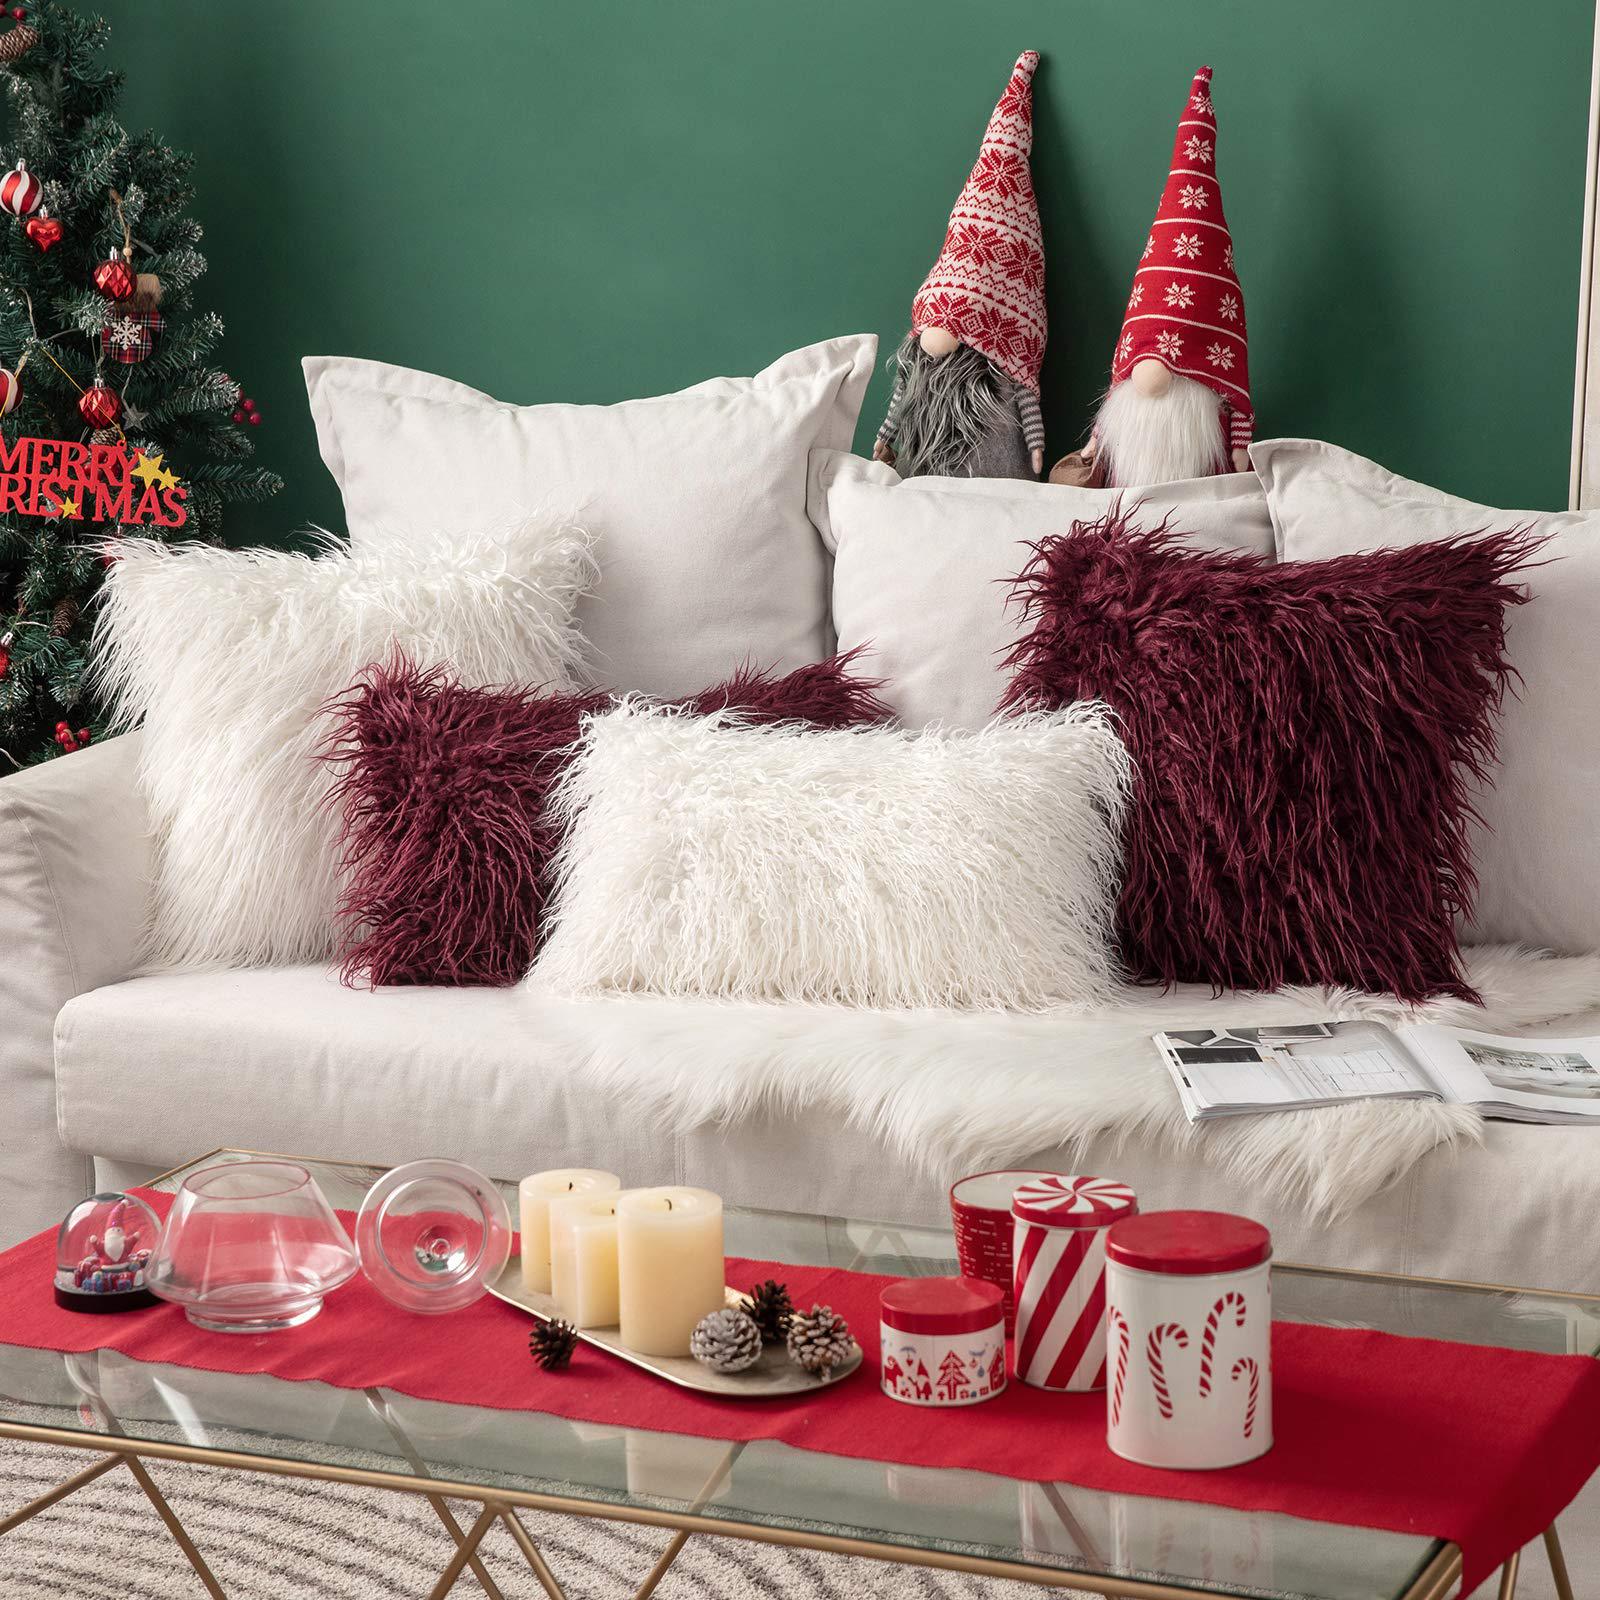 miulee decorative new luxury series style white faux fur throw pillow case cushion cover for christmas sofa bedroom car 12 x 